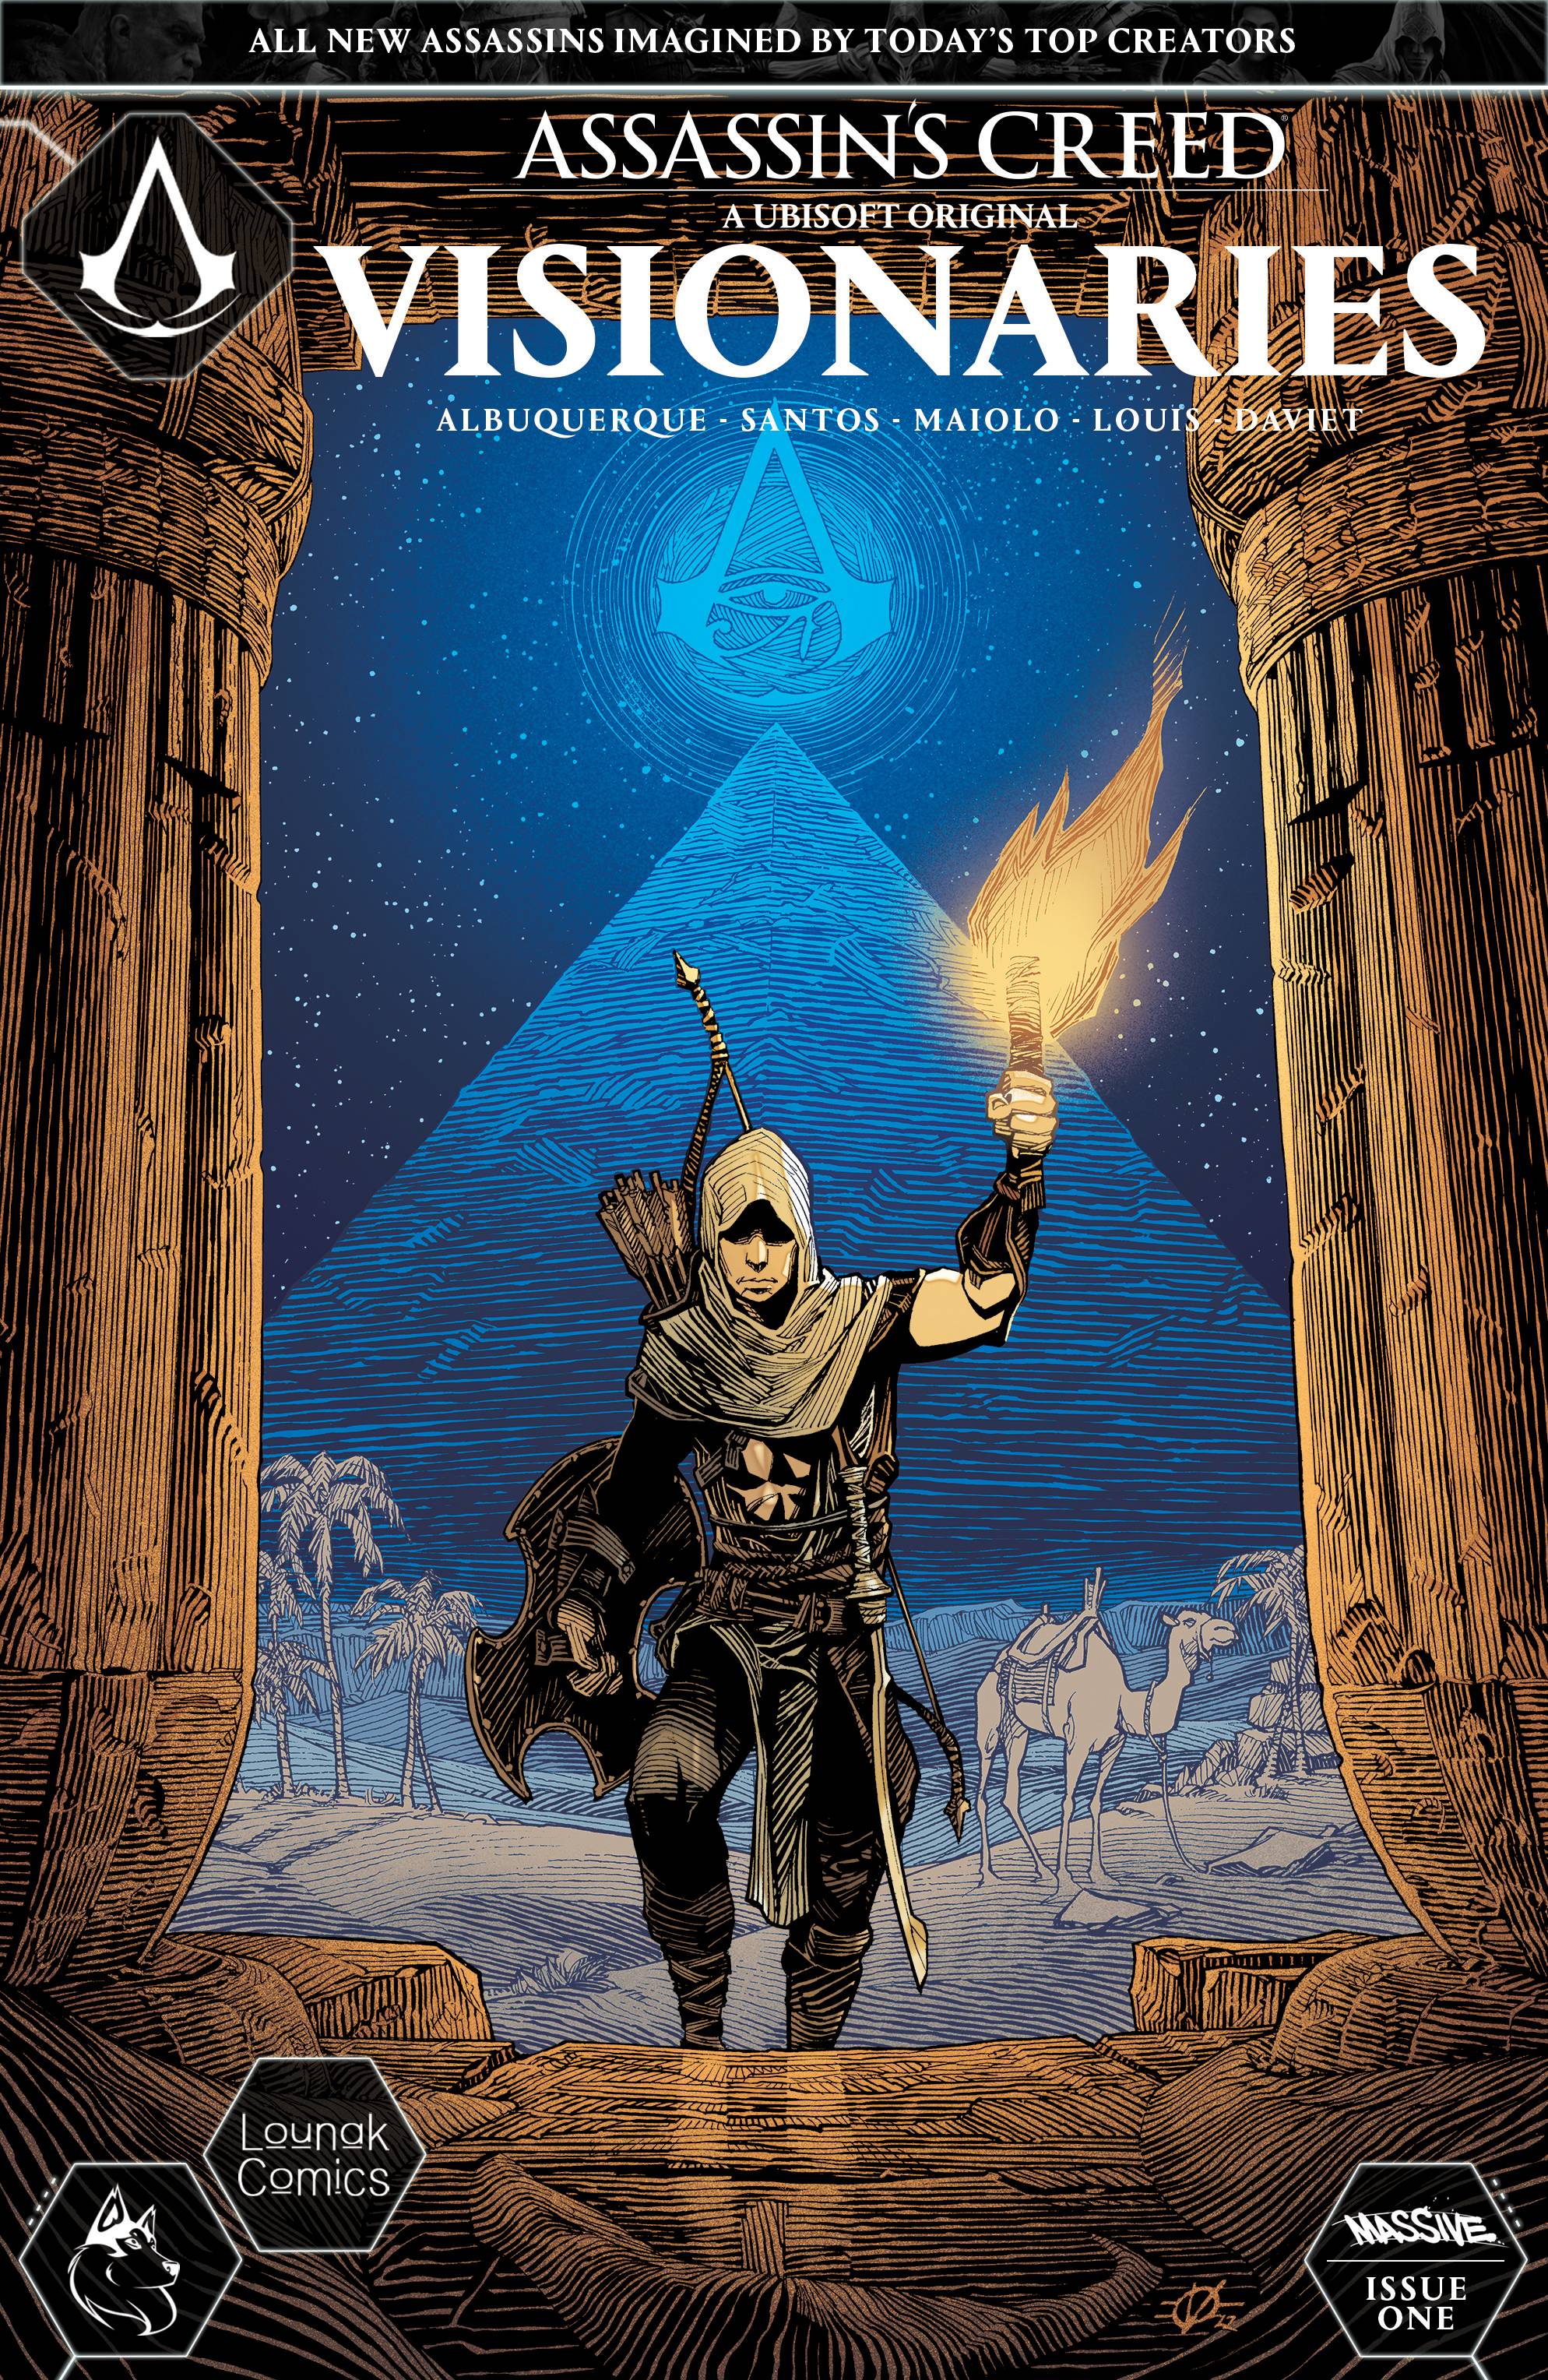 Assassins Creed Last Descendants Book Series Coming This Year